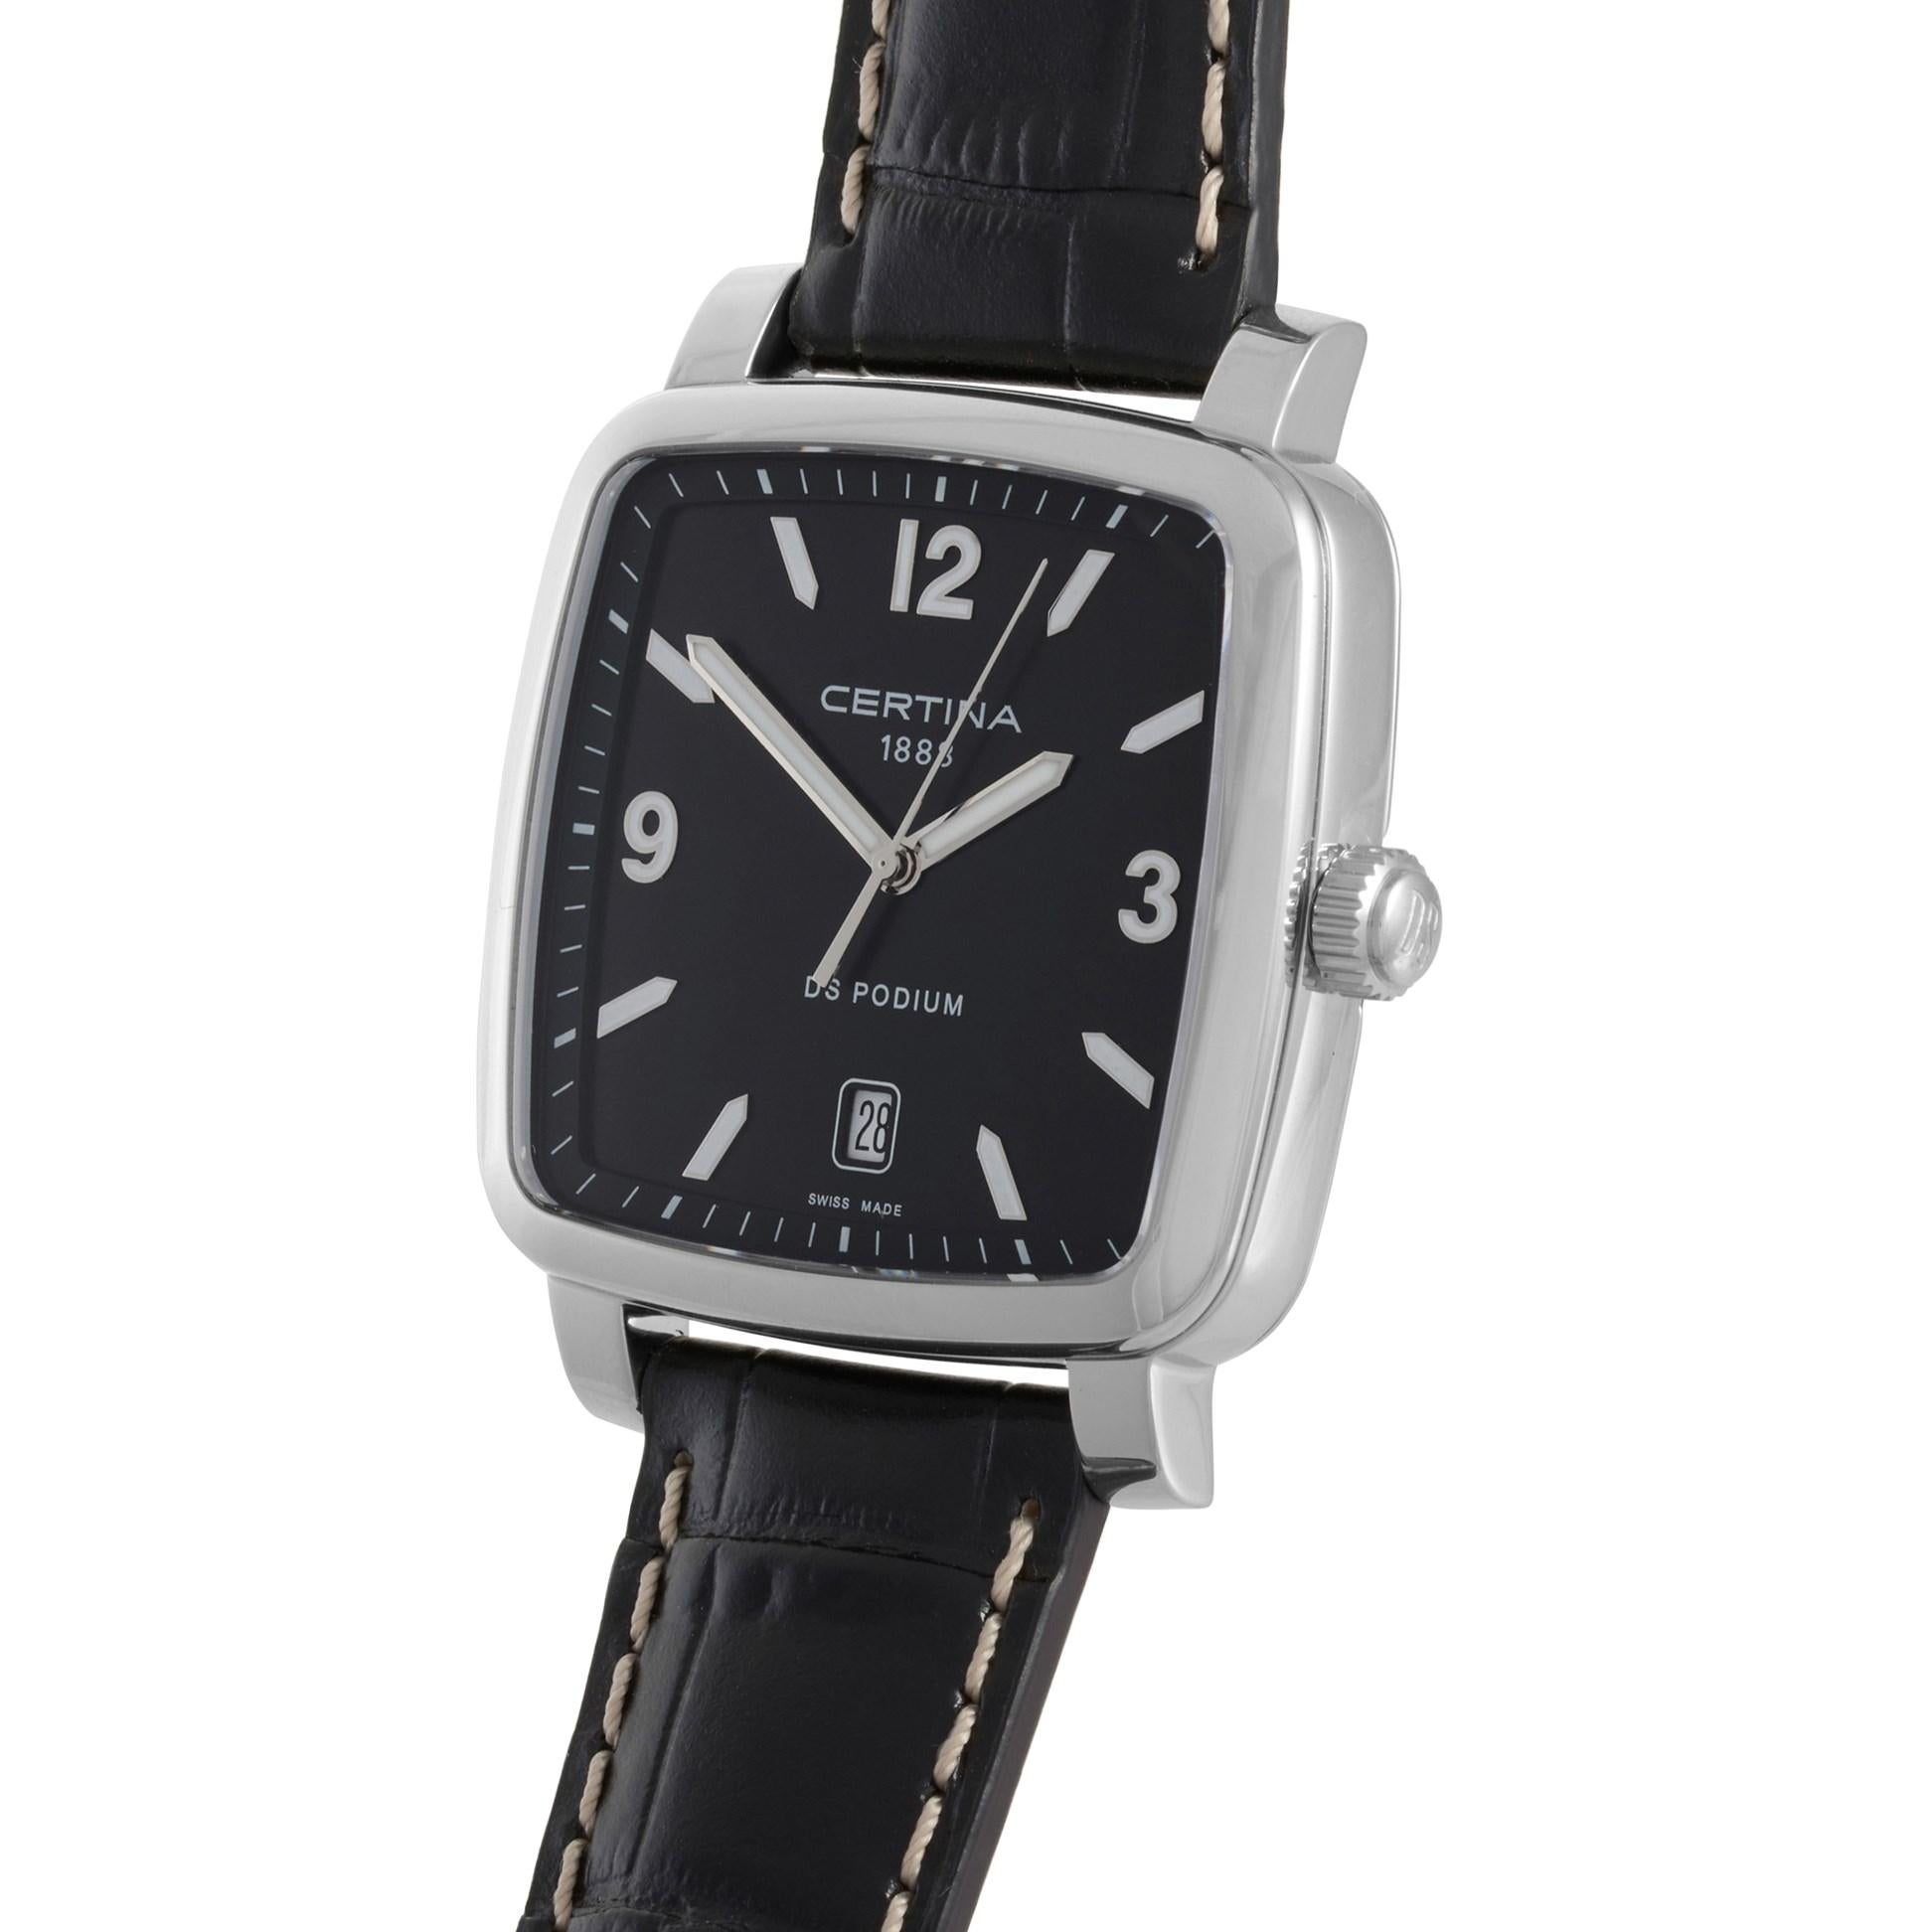 The Certina DS Podium watch, reference number C0255101605700, comes with a 34.50 mm stainless steel case presented on a black leather strap that is fitted with a deployment clasp. This model is powered by the ETA F06.111 quartz movement. The black